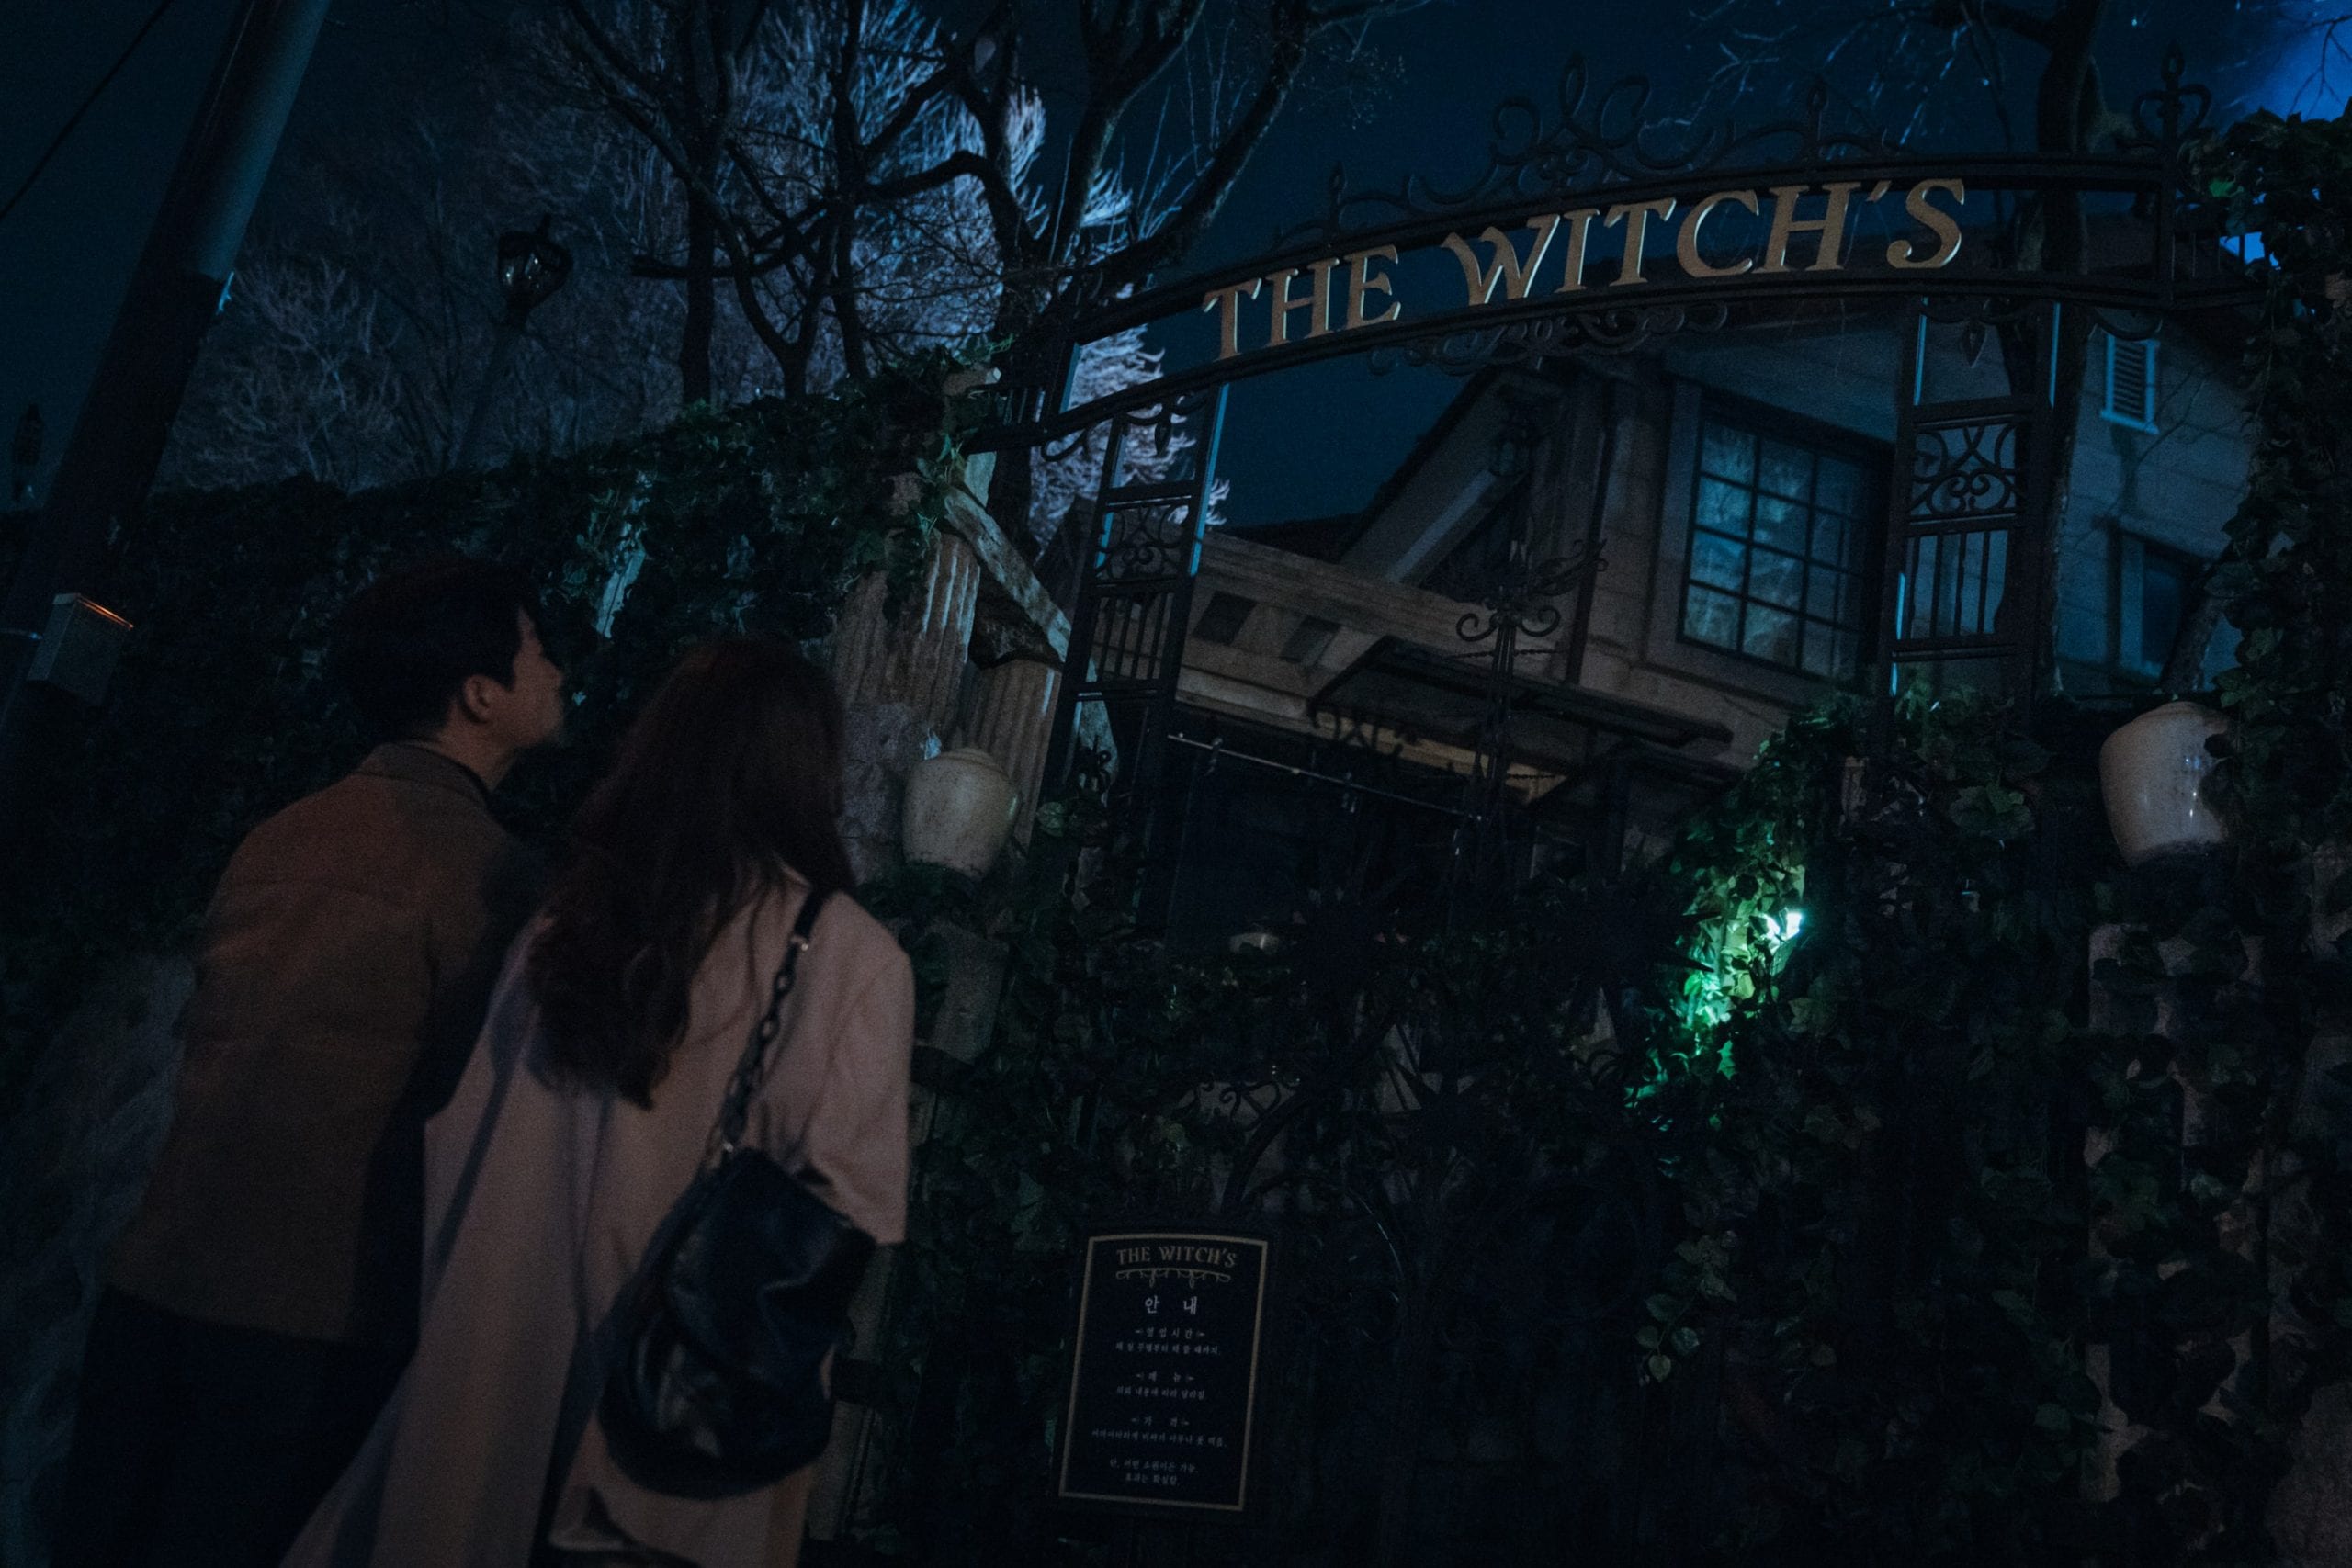 Come to the witch restaurant